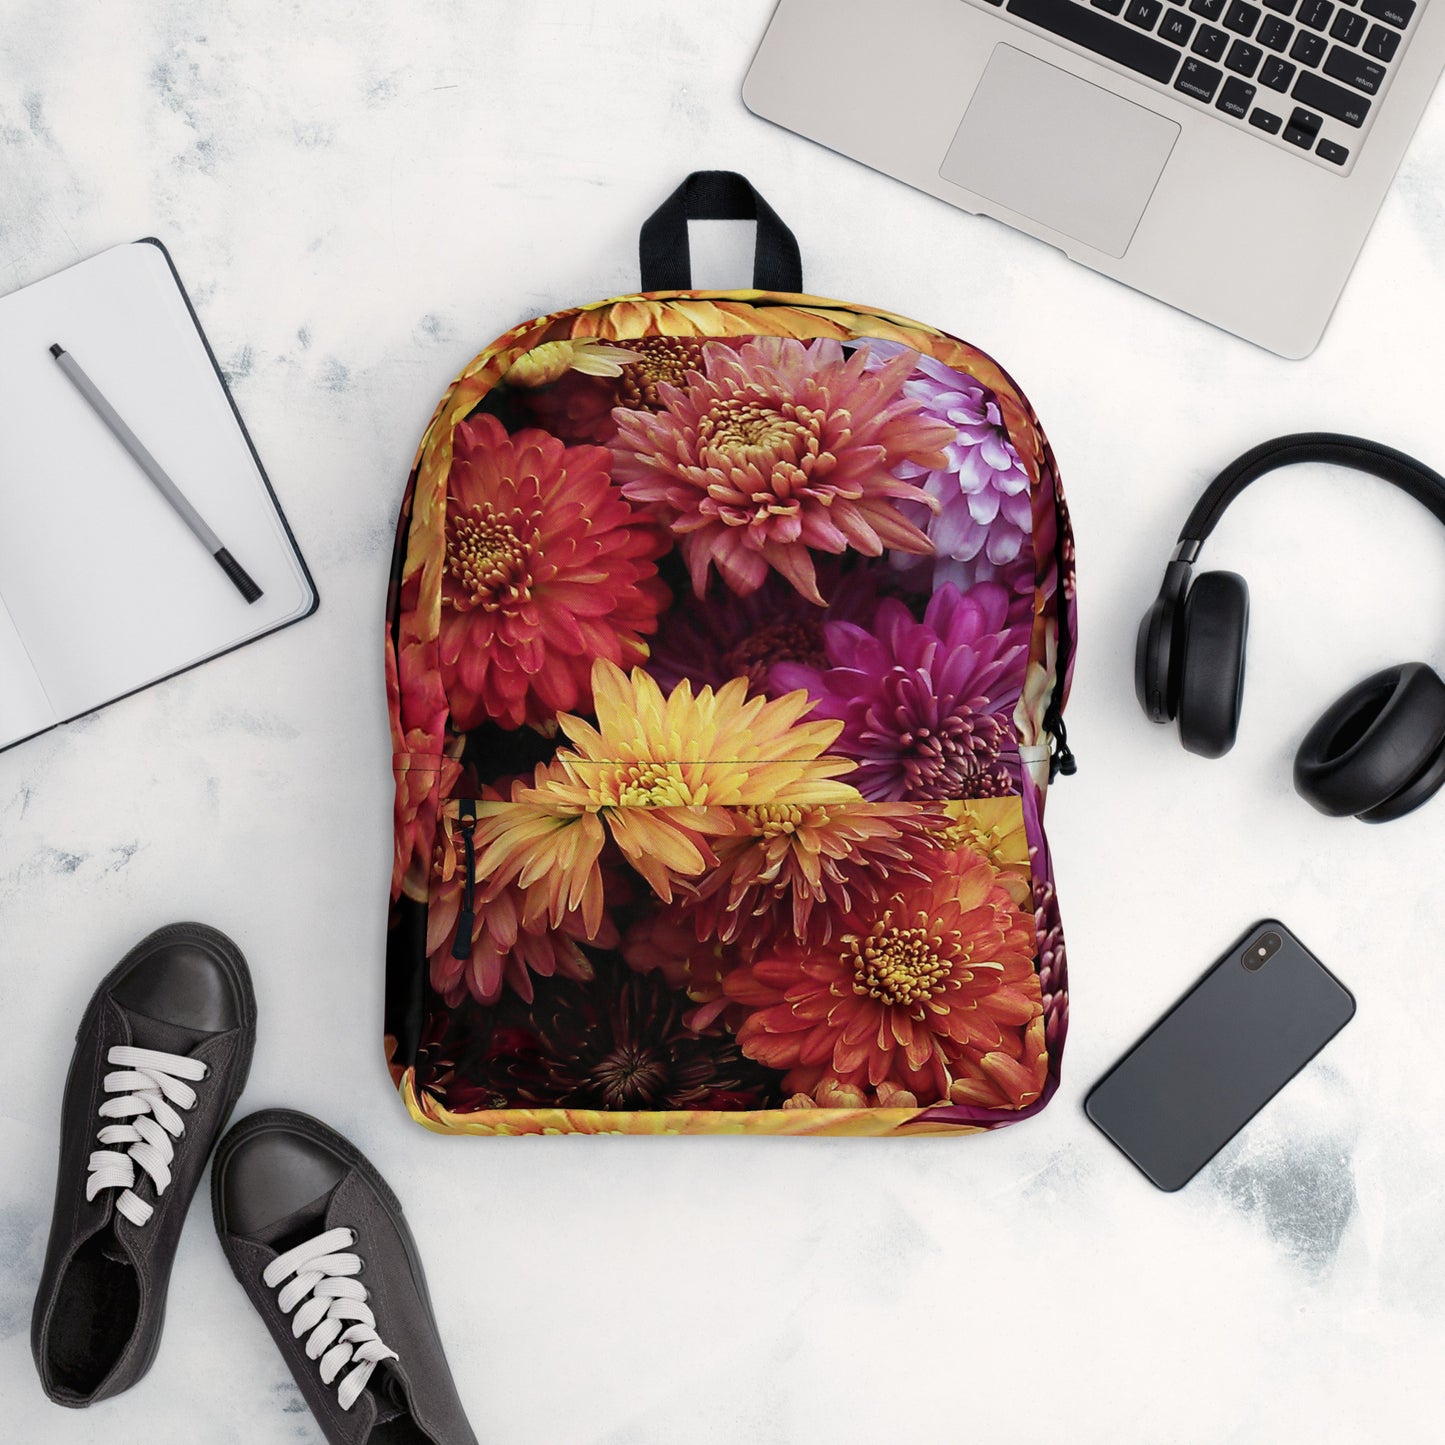 Backpack - Fall Flowers Backpack Stylin' Spirit Default Title  